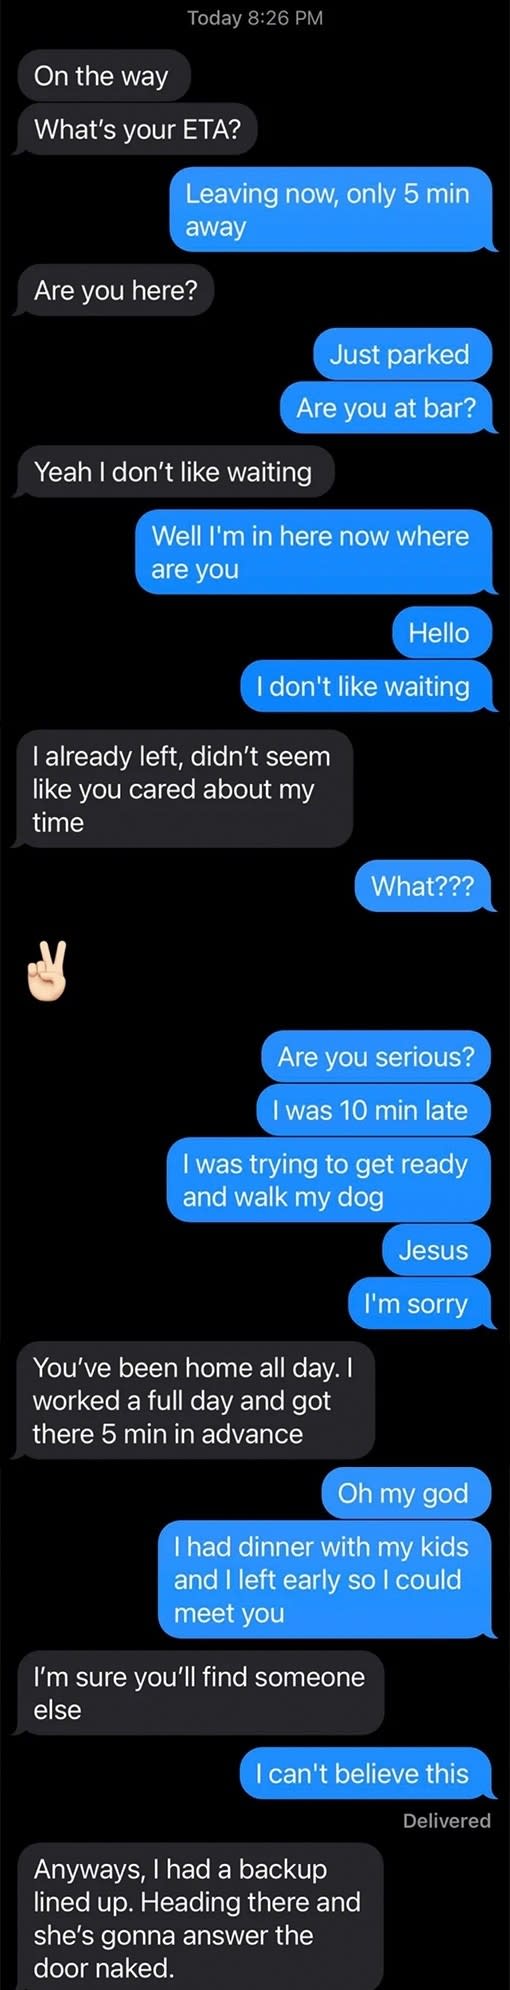 messages revealing one person was 10 minutes late and the other left, then said they were going on a different date